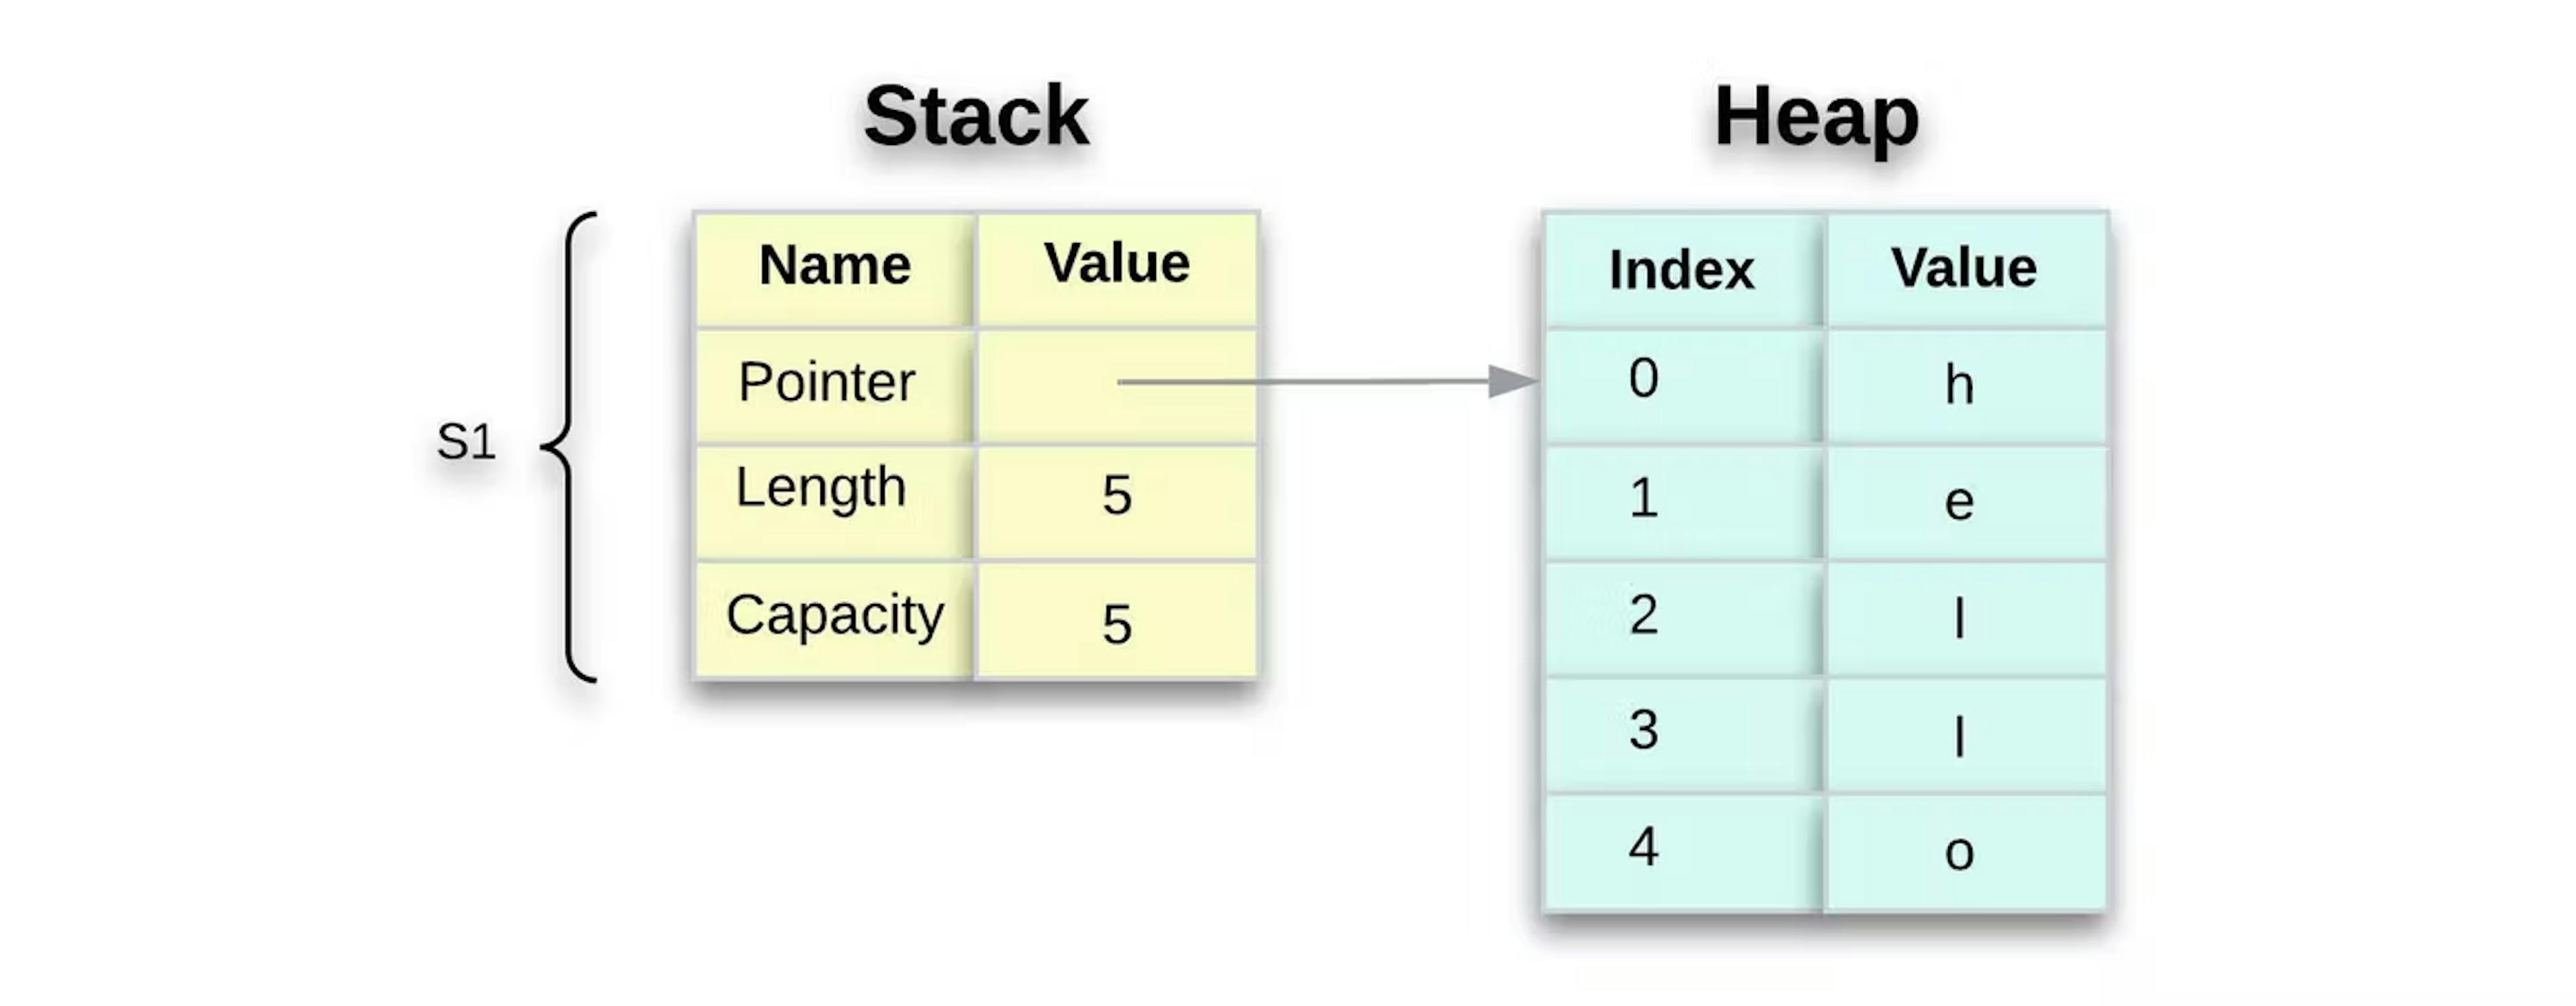 Figure 5: The stack holds the metadata while the heap holds the actual contents.